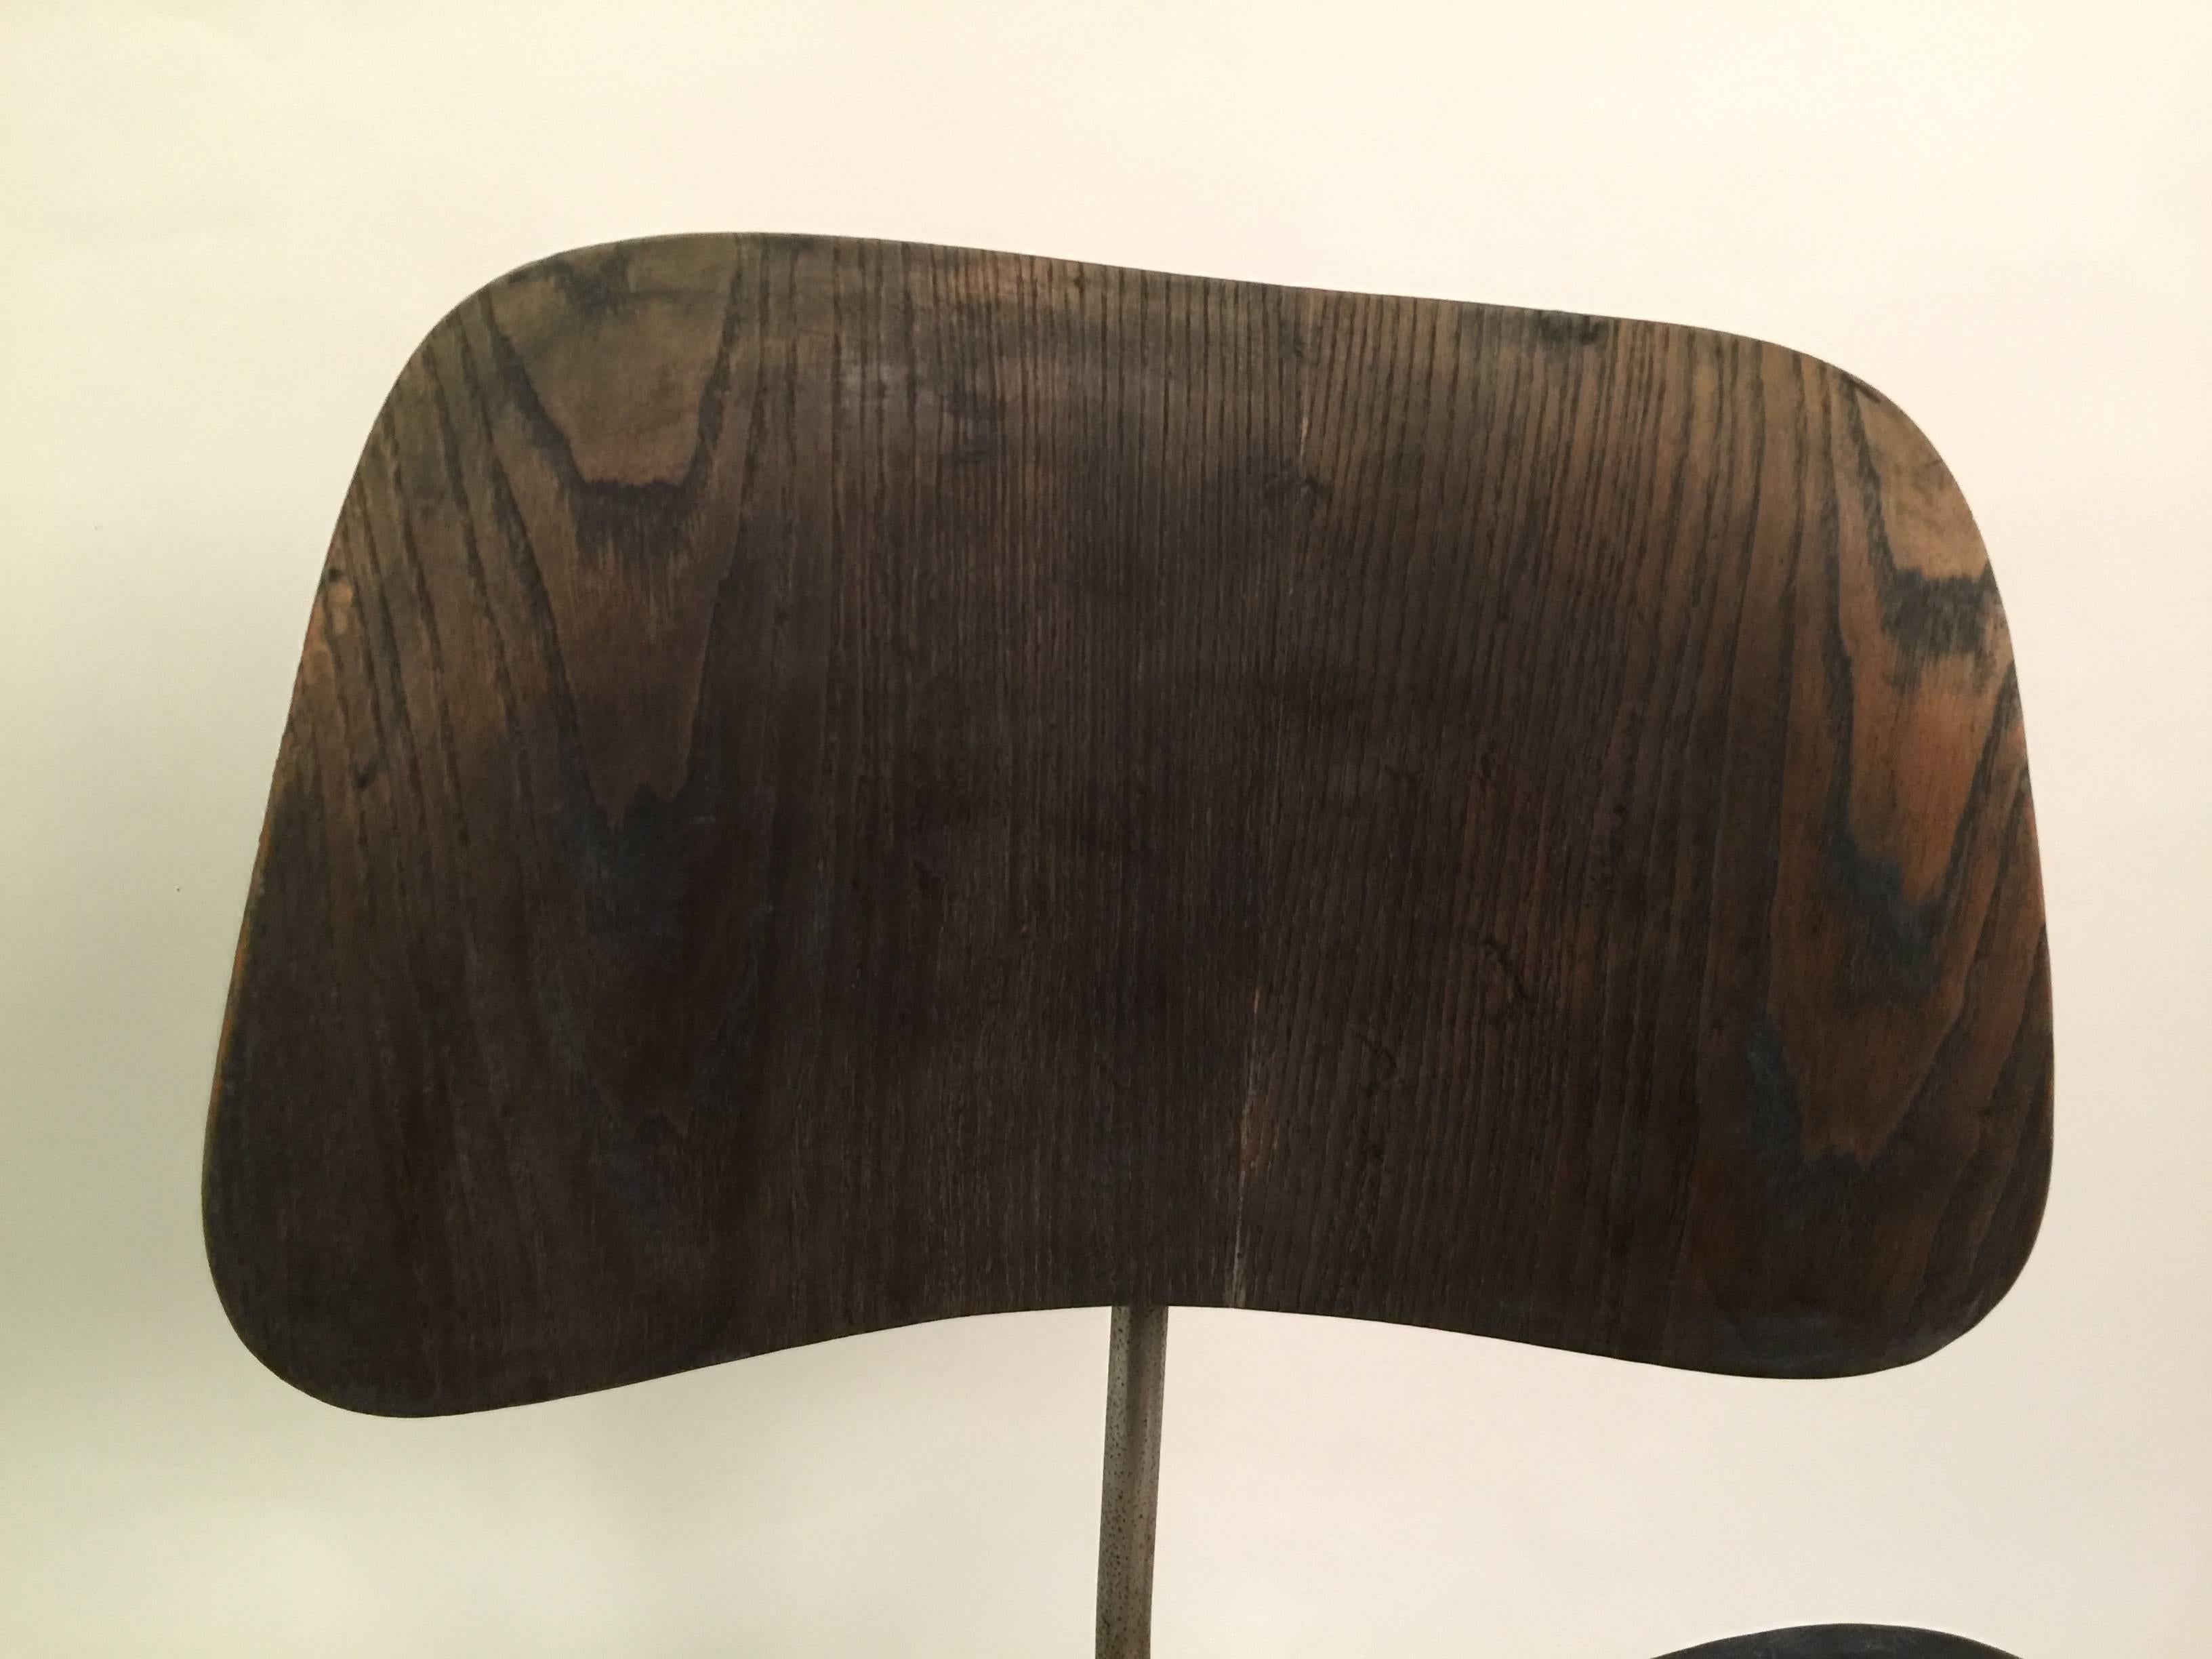 Black aniline DCM dining chair by Charles and Ray Eames. these first edition chairs were produced by Evans manufacturing and distributed by Herman Miller. Chair has labels intact fitted with new boot glides.